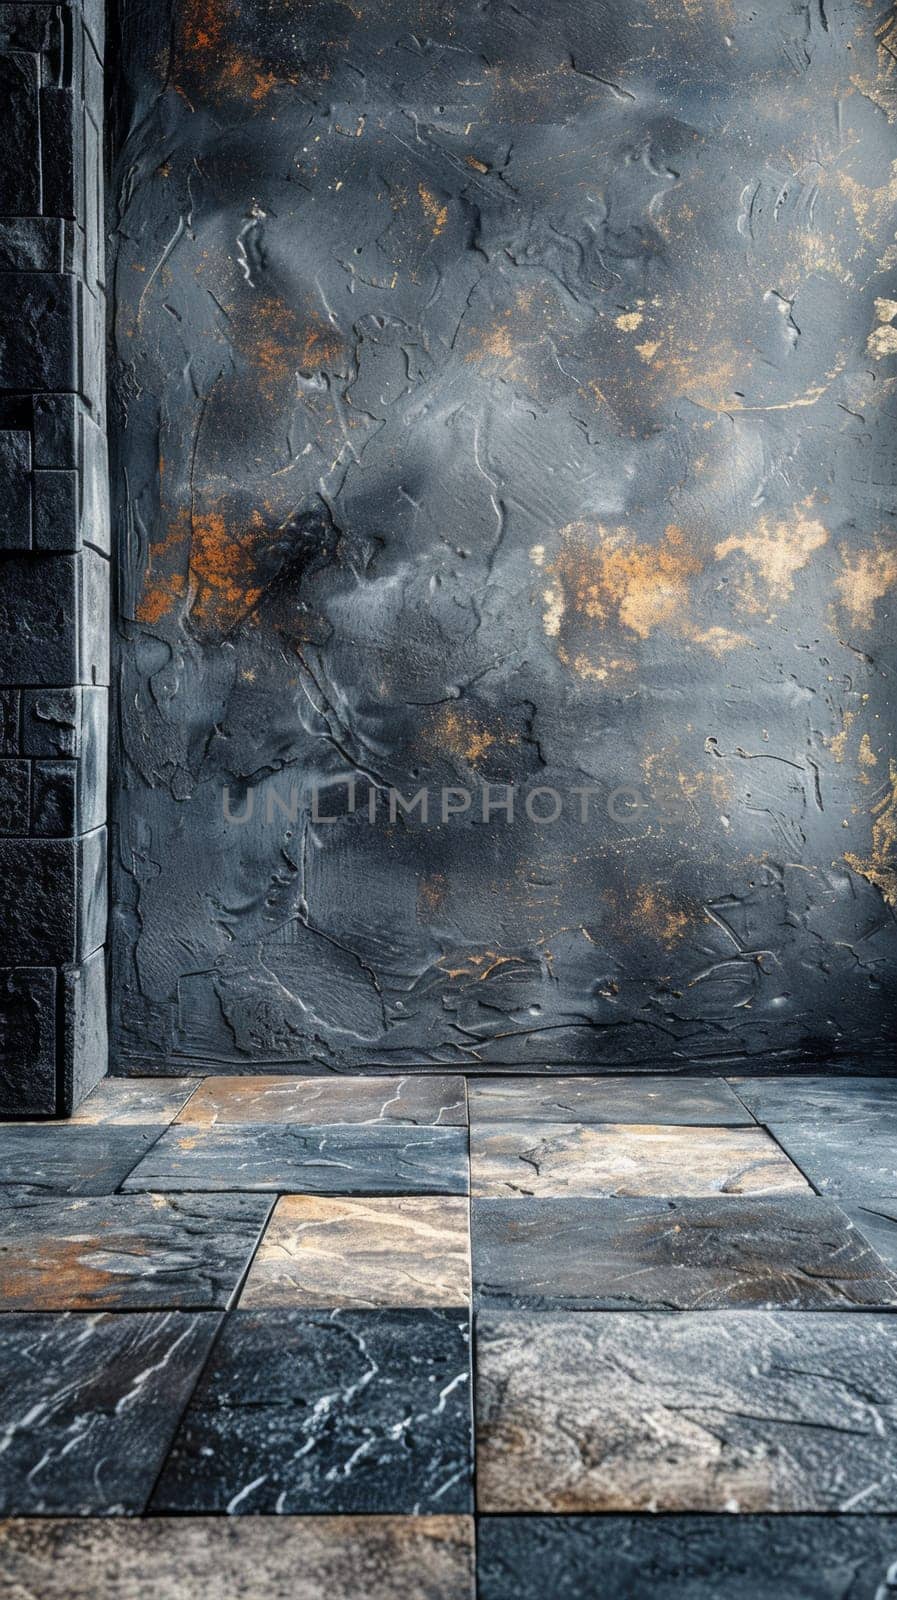 A room with a stone wall and floor tiles in the background